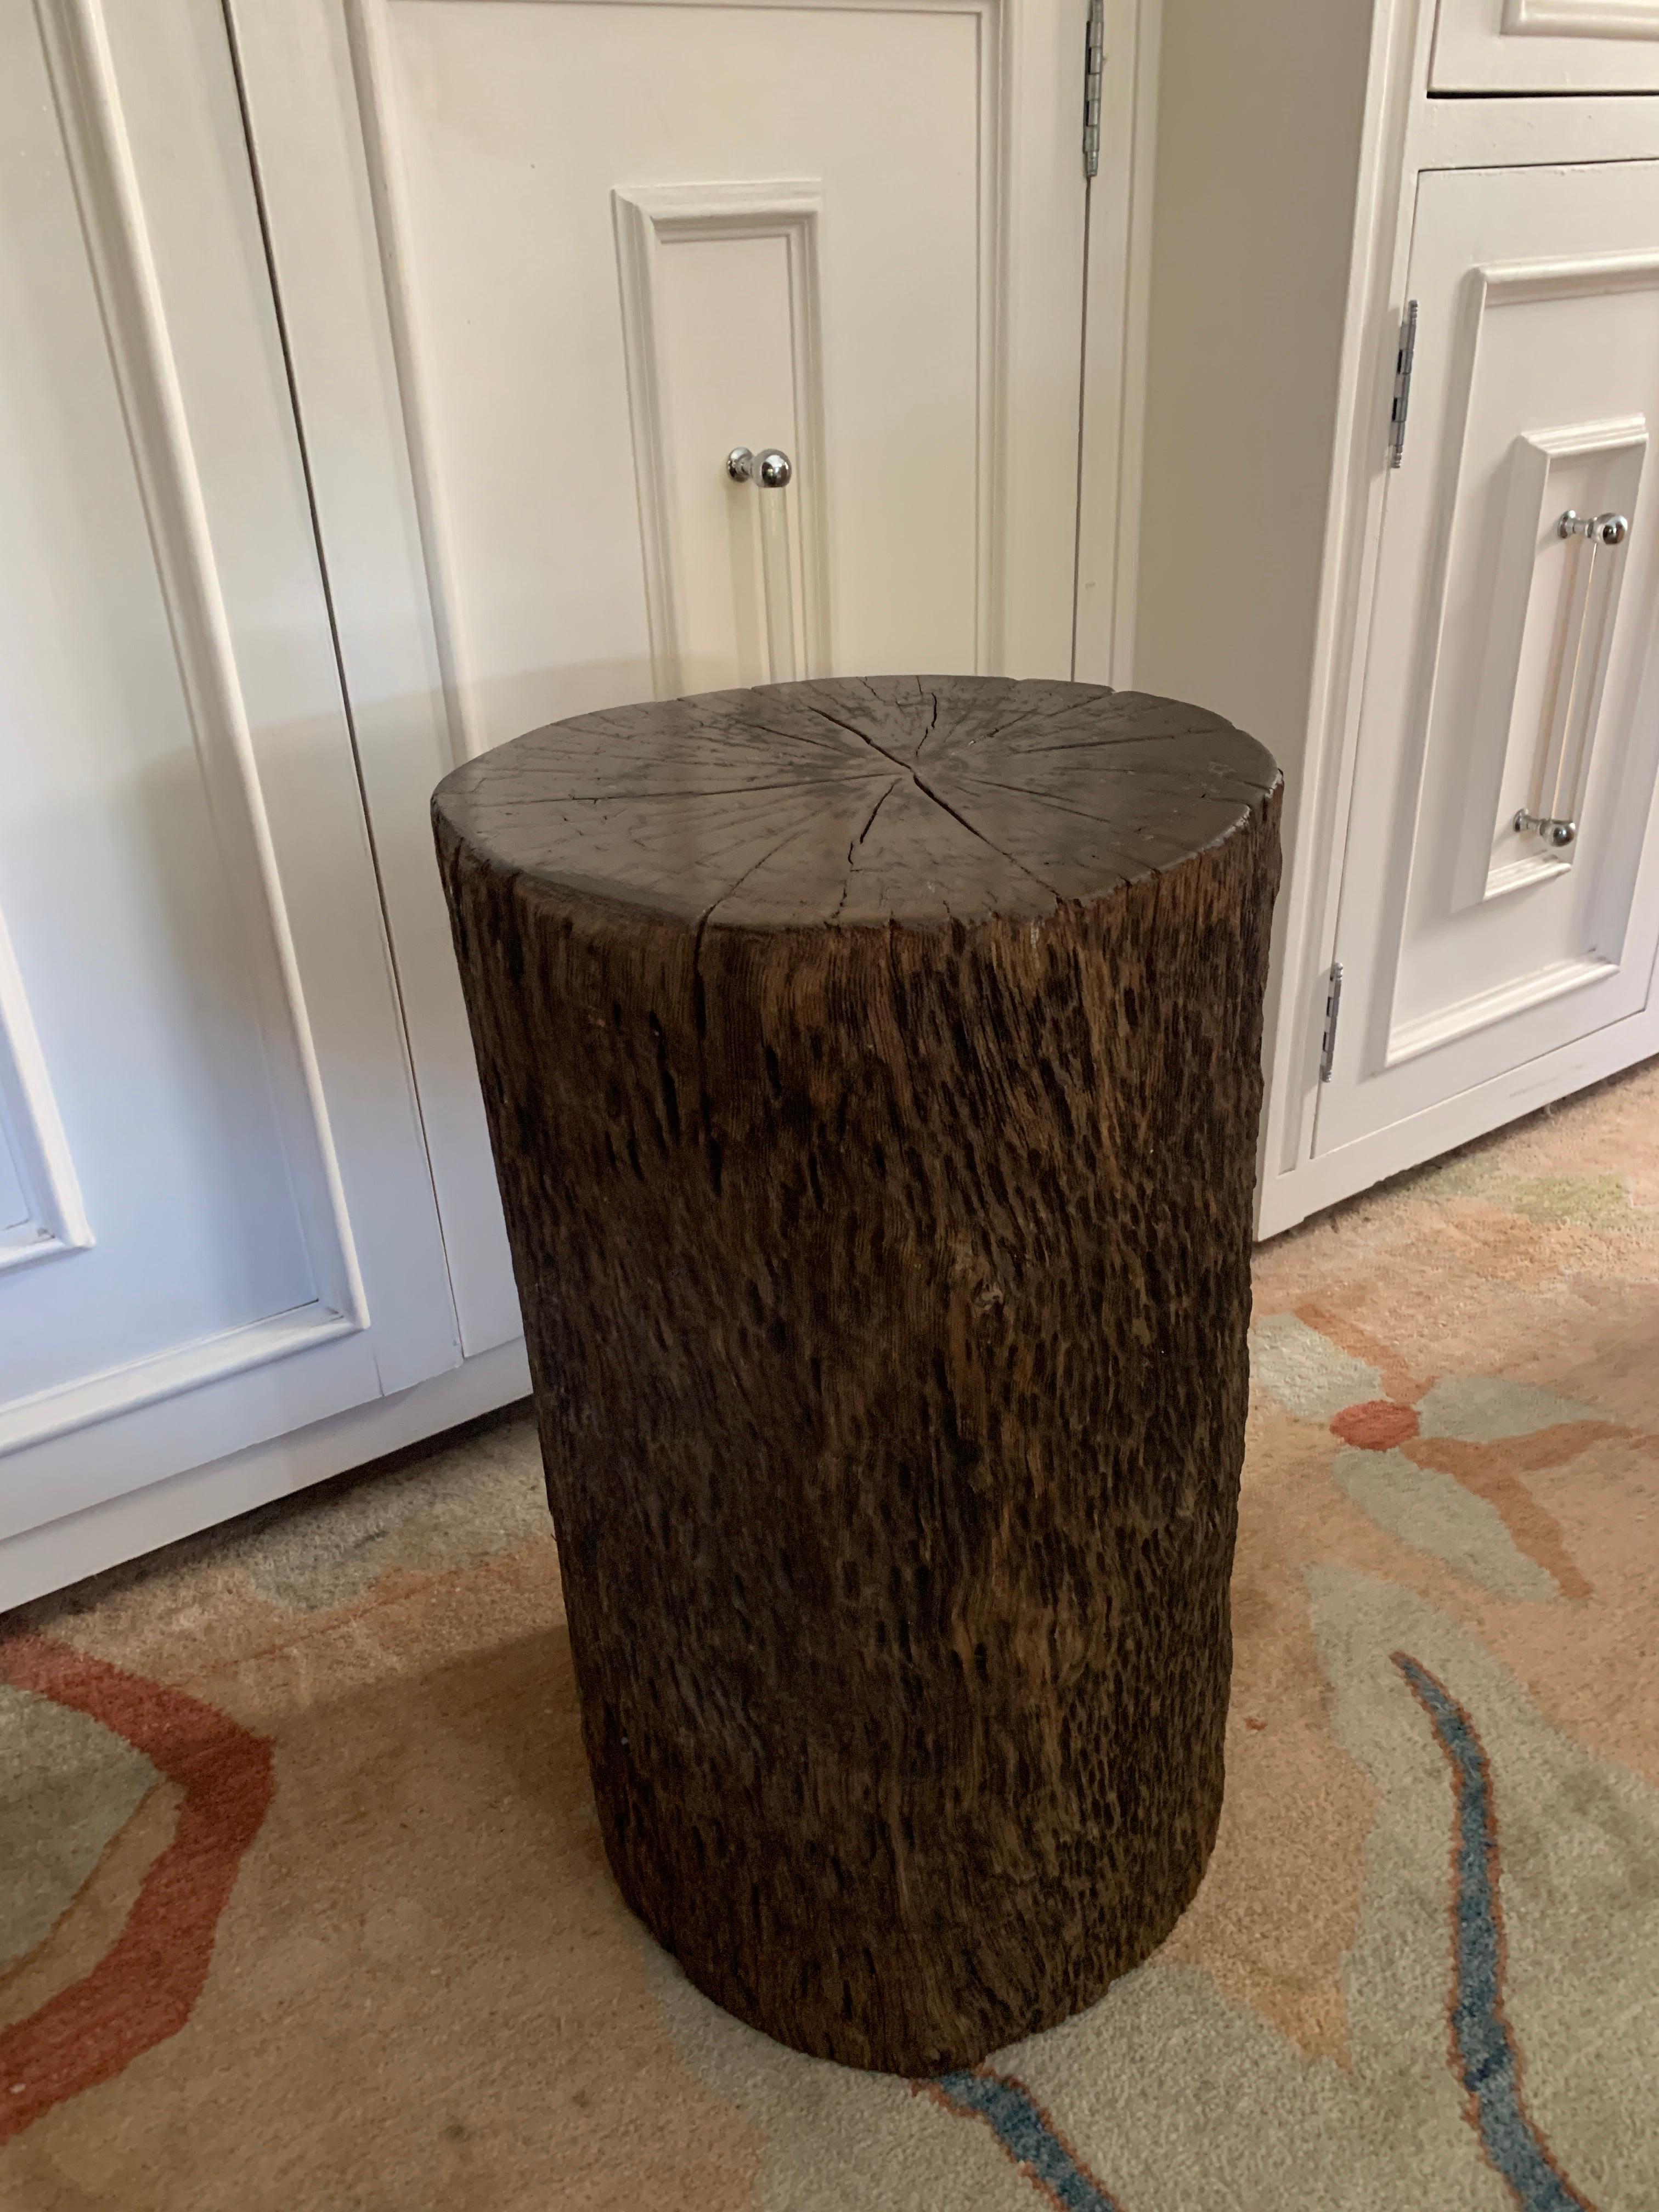 A tree stump side table or stool. A wonderfully unique bark and texture with a polished full grain top revealing the rings. The natural nature of an organic piece lends itself to many spaces including garden room, indoor or outdoor and many of the